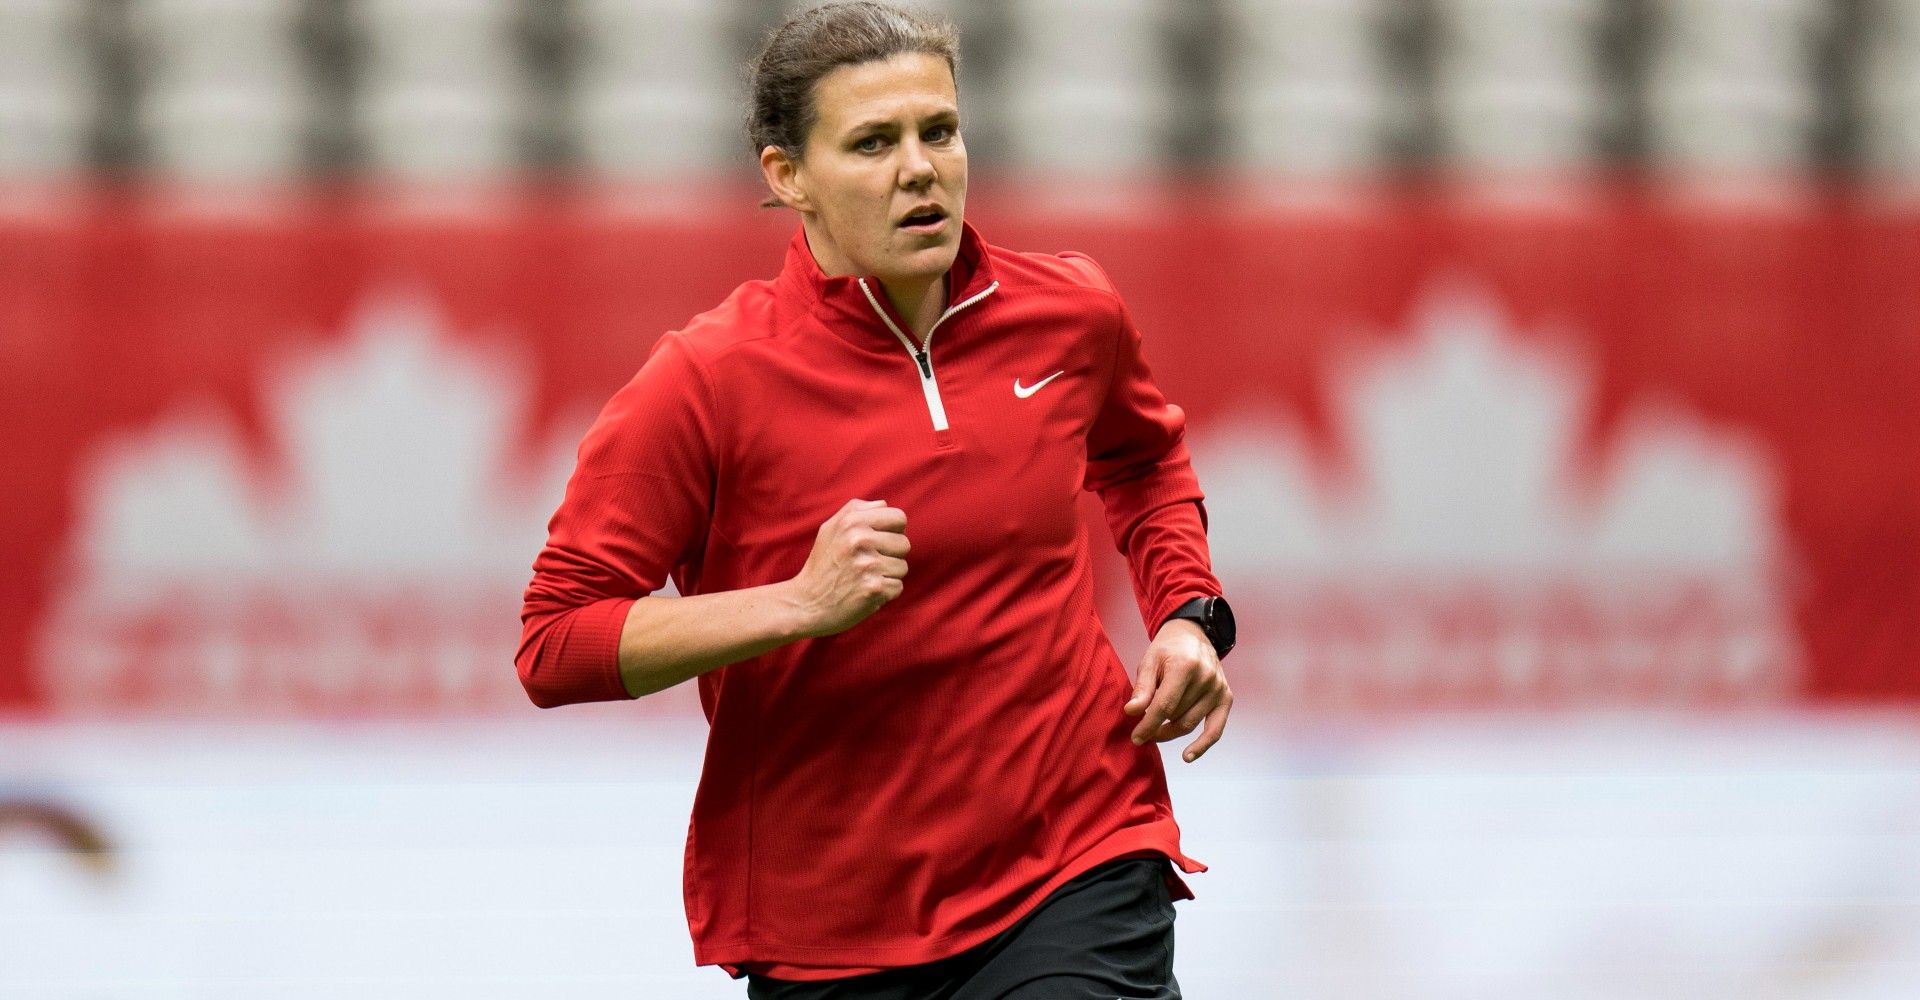 CanWNT Talk: Olympic champs to face Argentina, Morocco